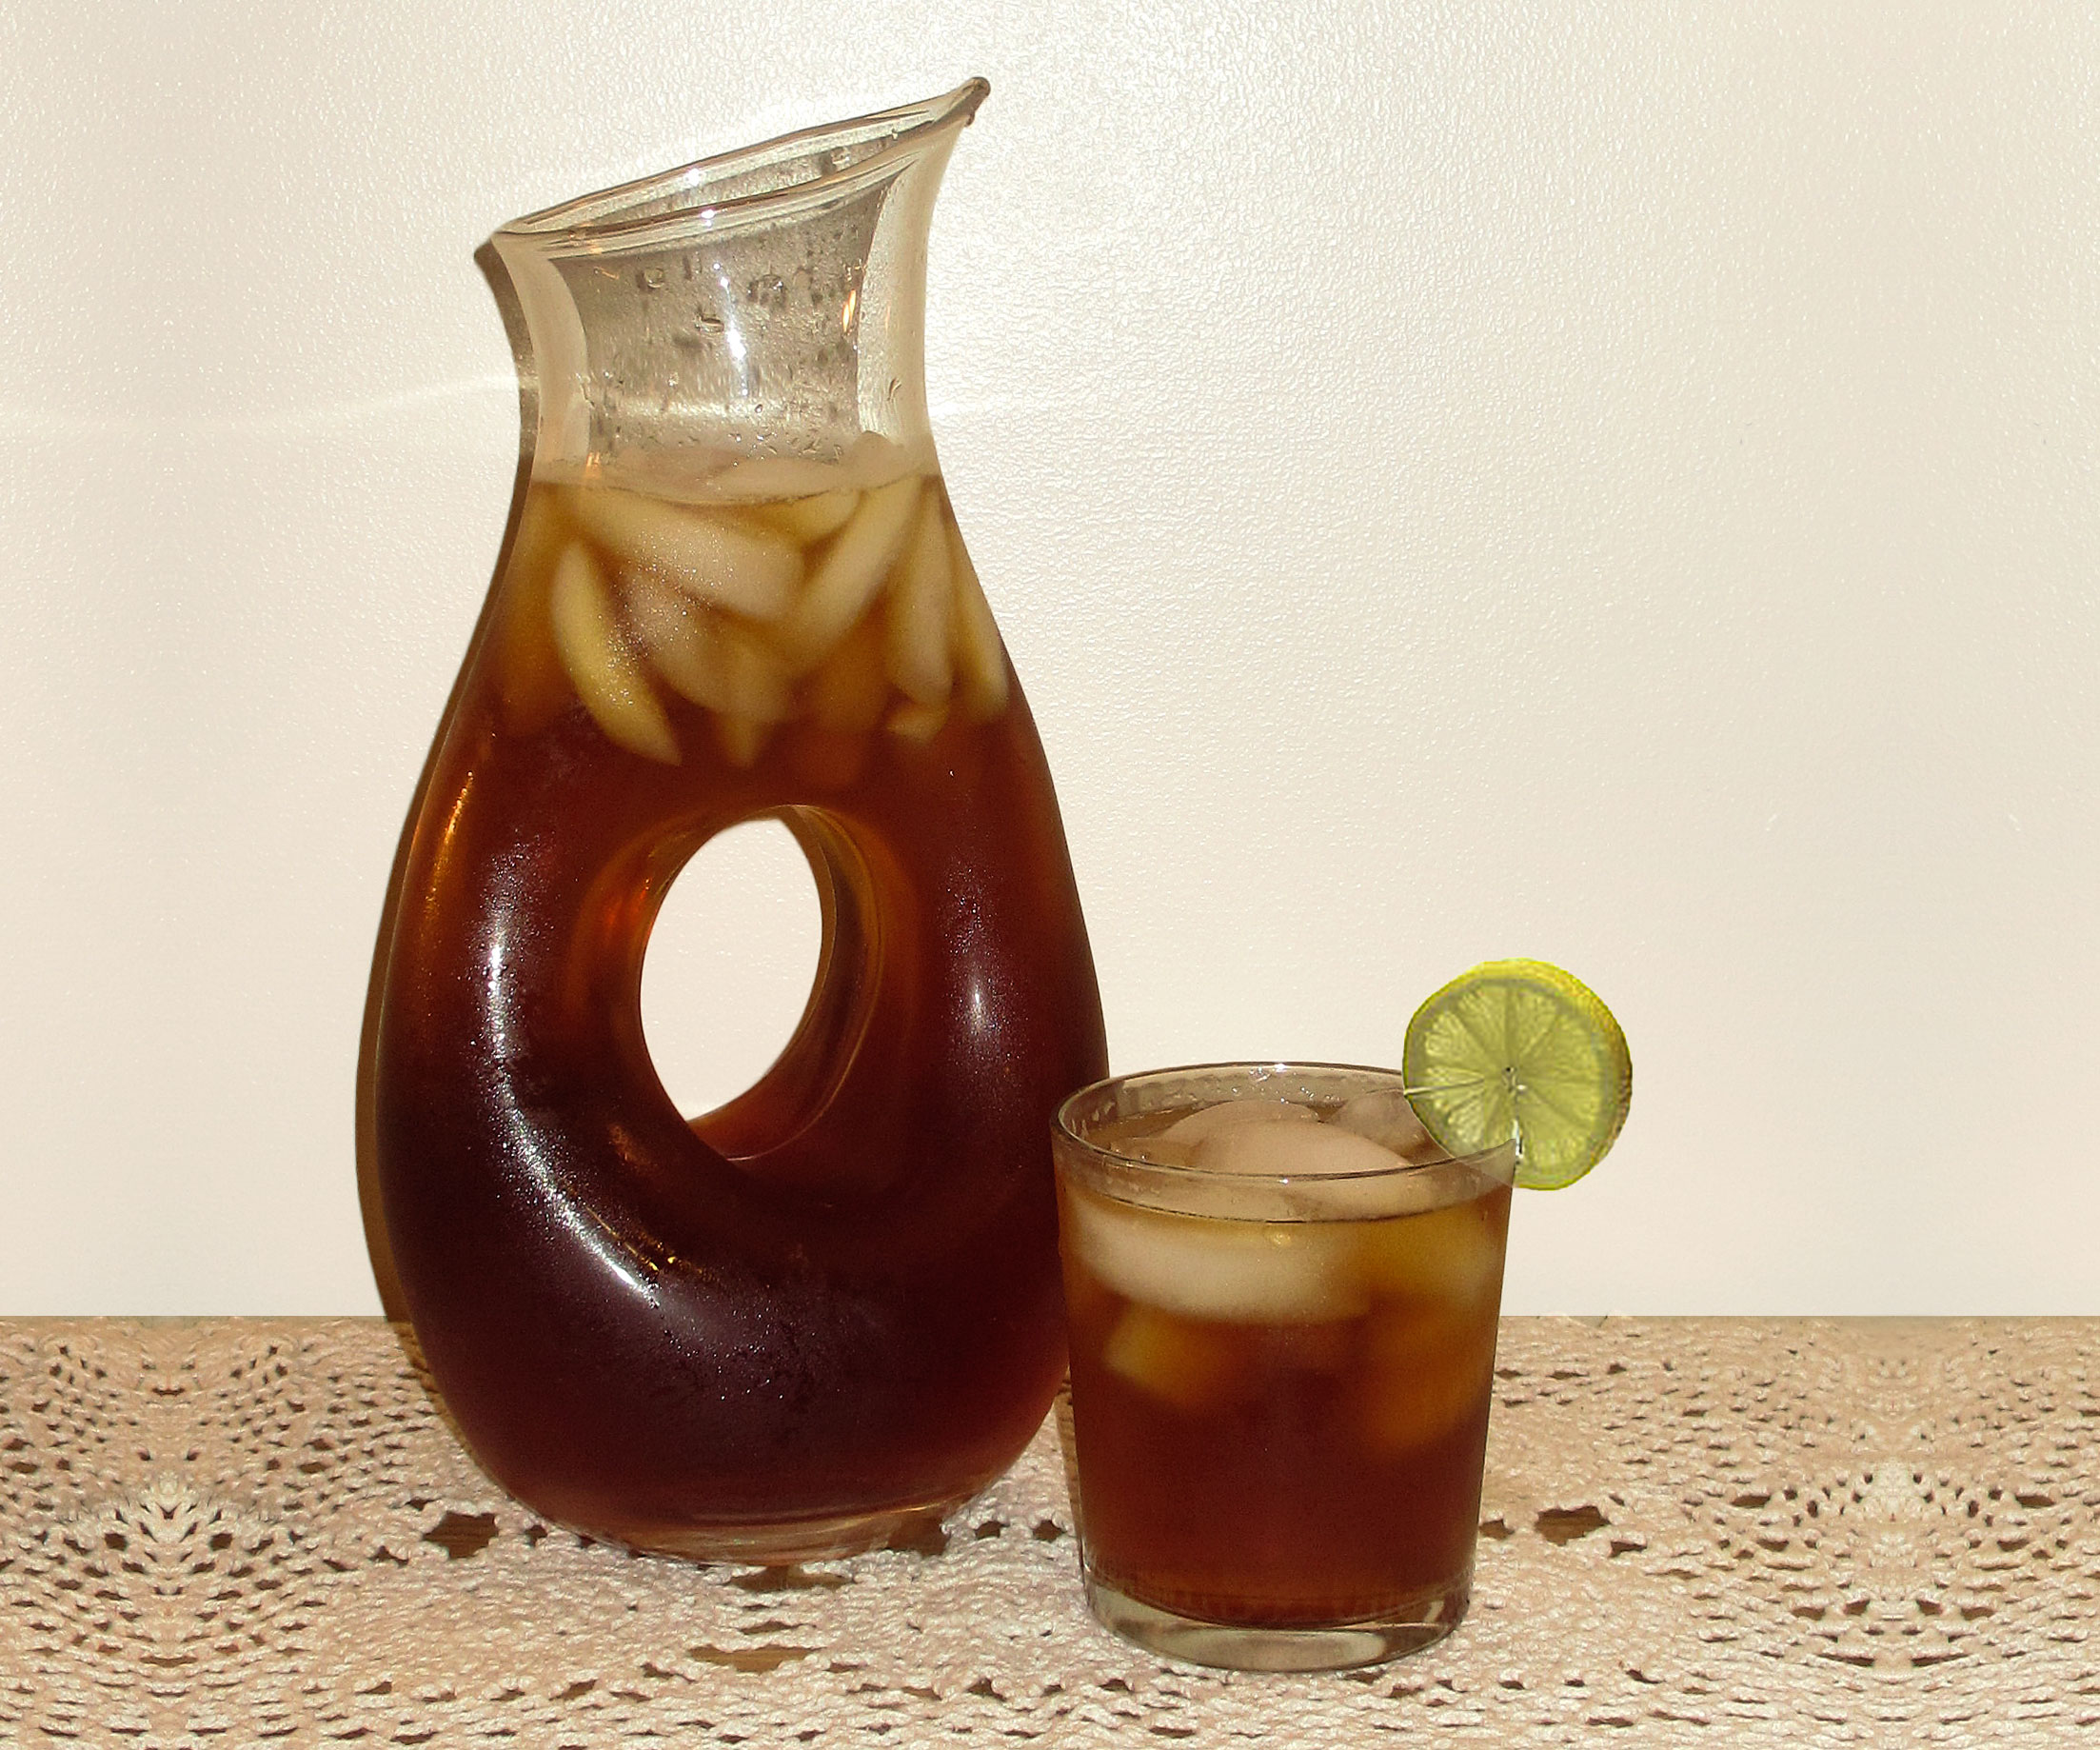 Pitcher of iced tea next to a short glass filled with iced tea.